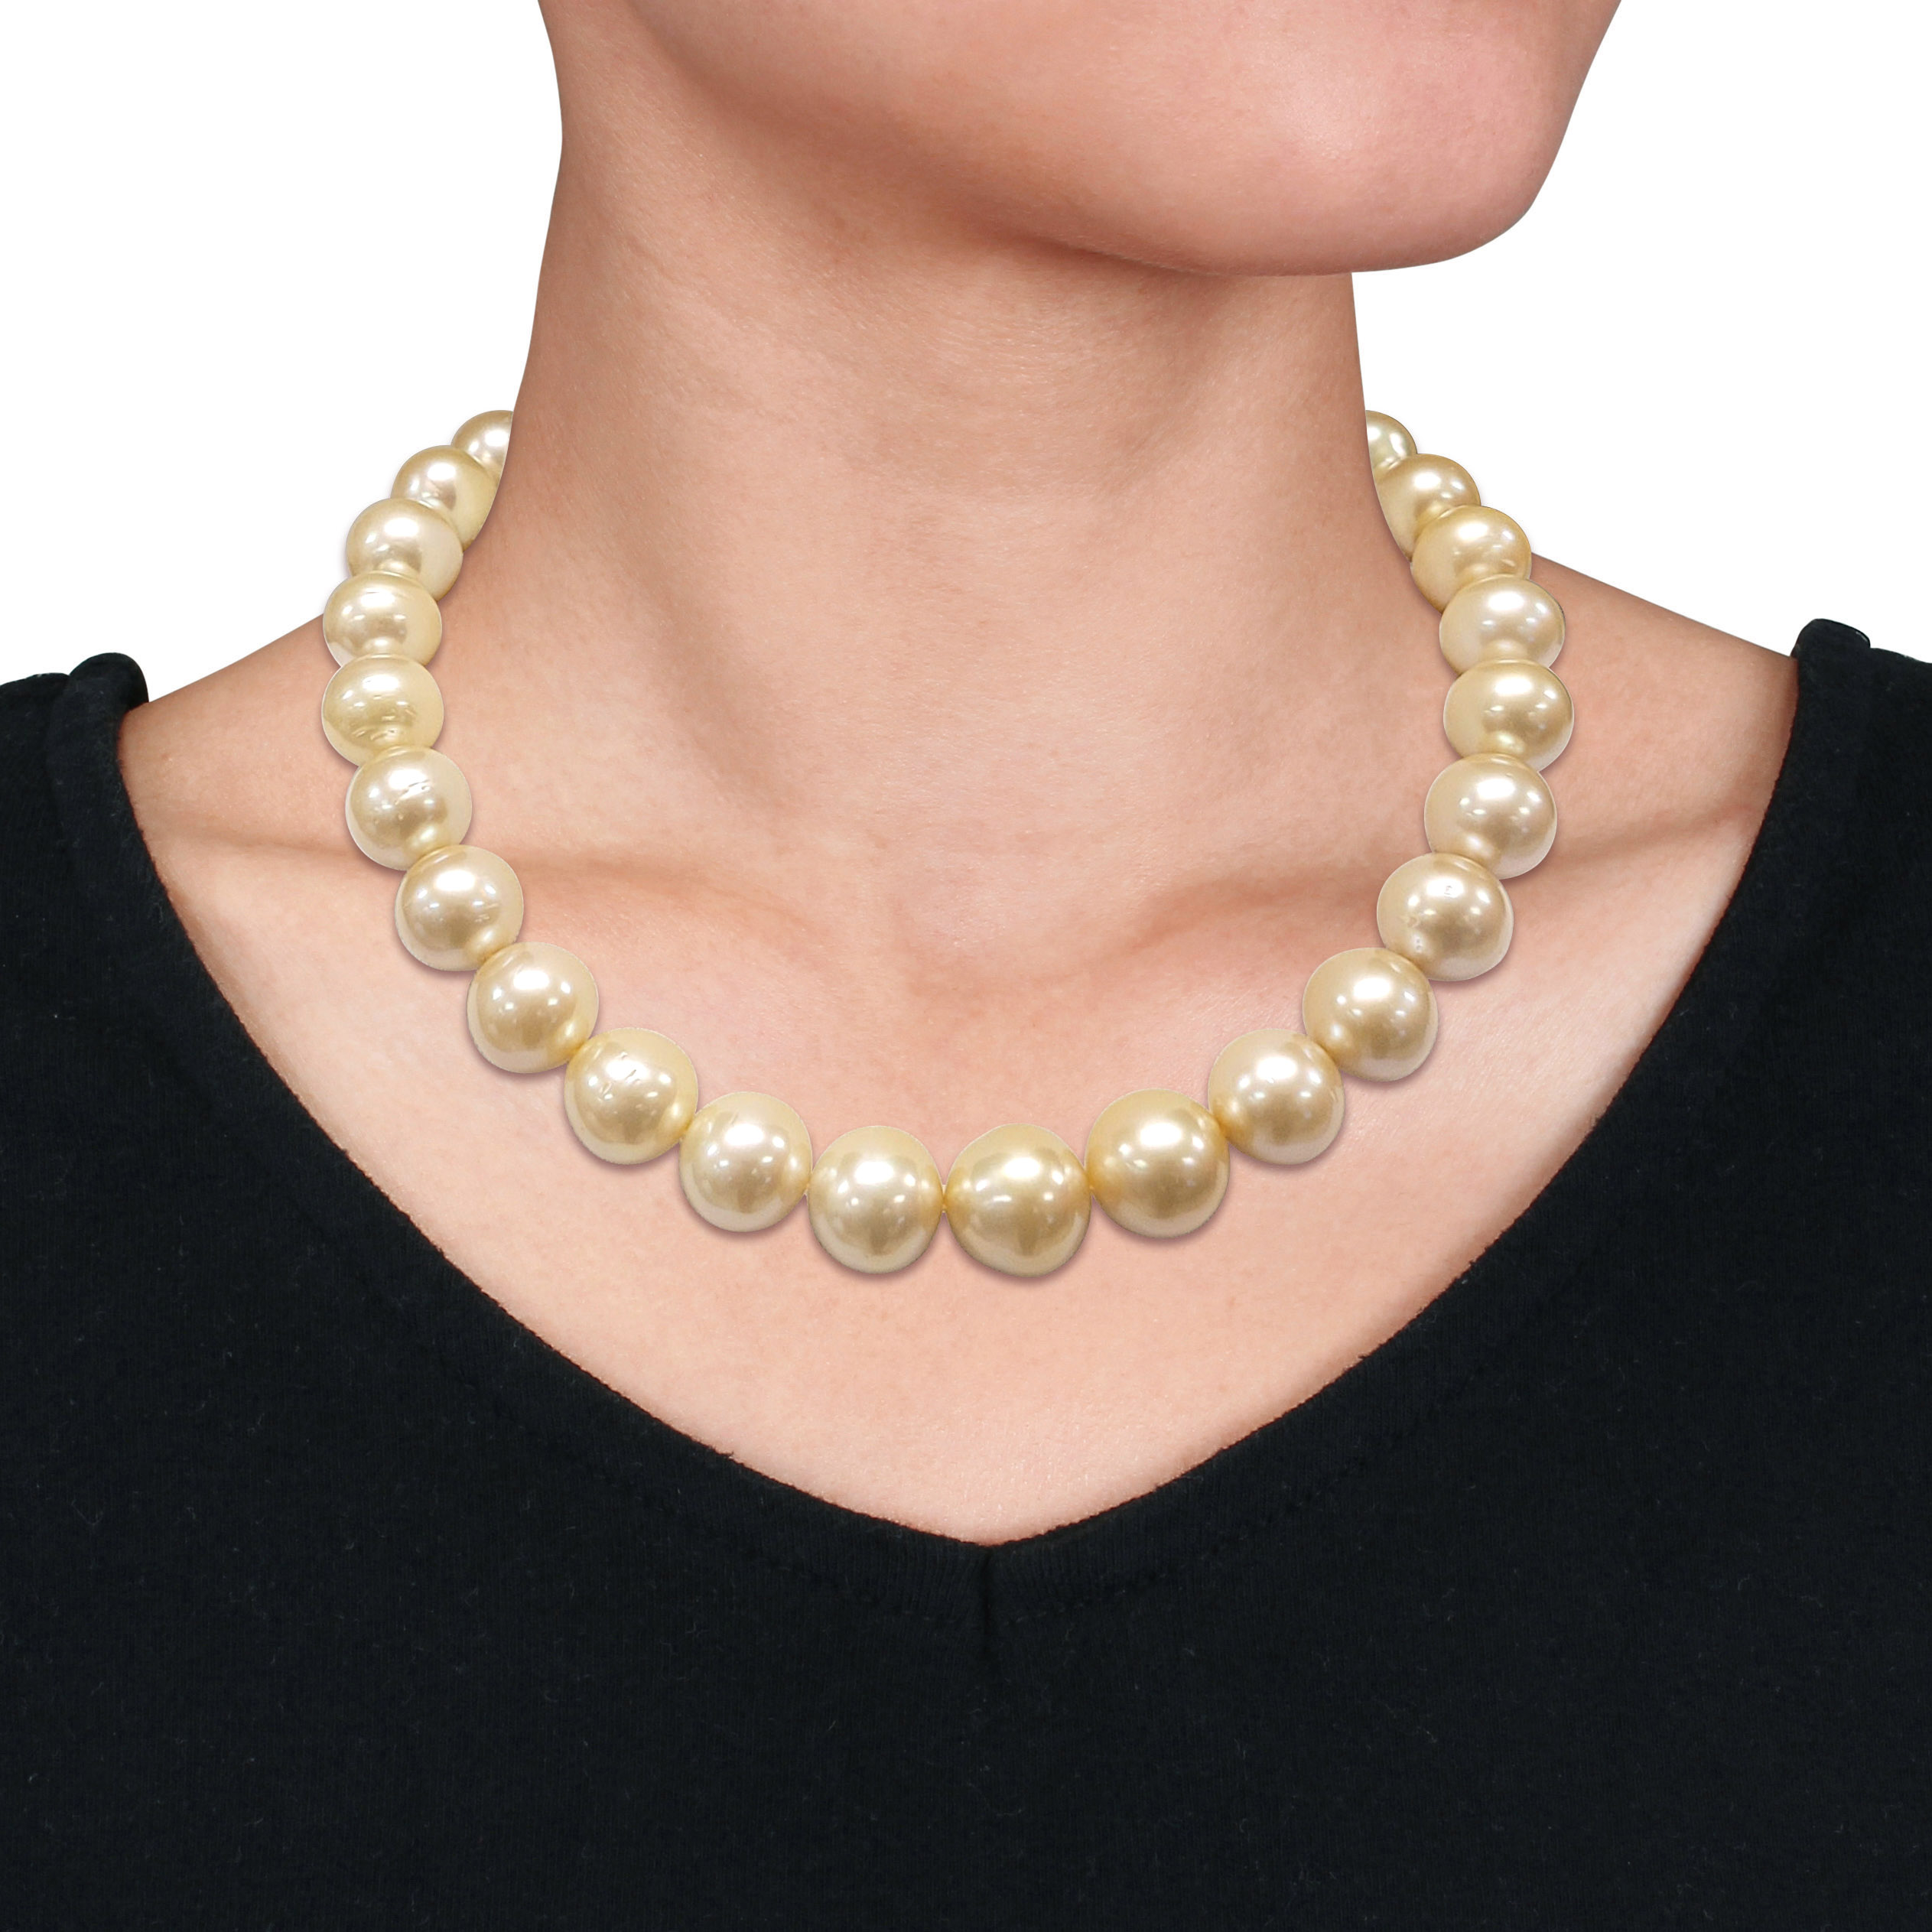 14-16.5 MM Graduated Golden South Sea Cultured Pearl Necklace with 14k Yellow Gold Diamond Accent Ball Clasp - 18 in